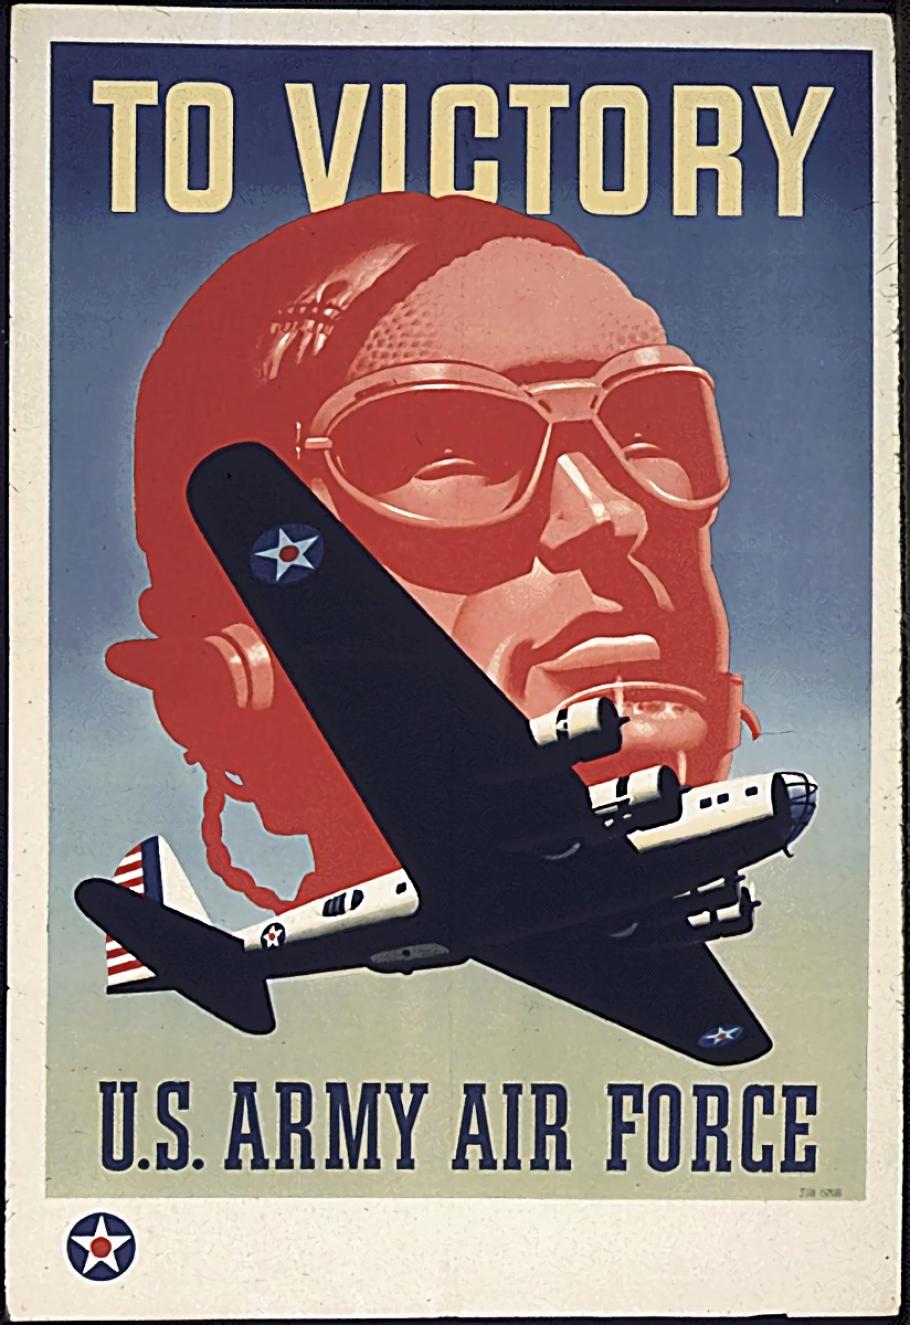 World War II poster advertising the US Army Air Force